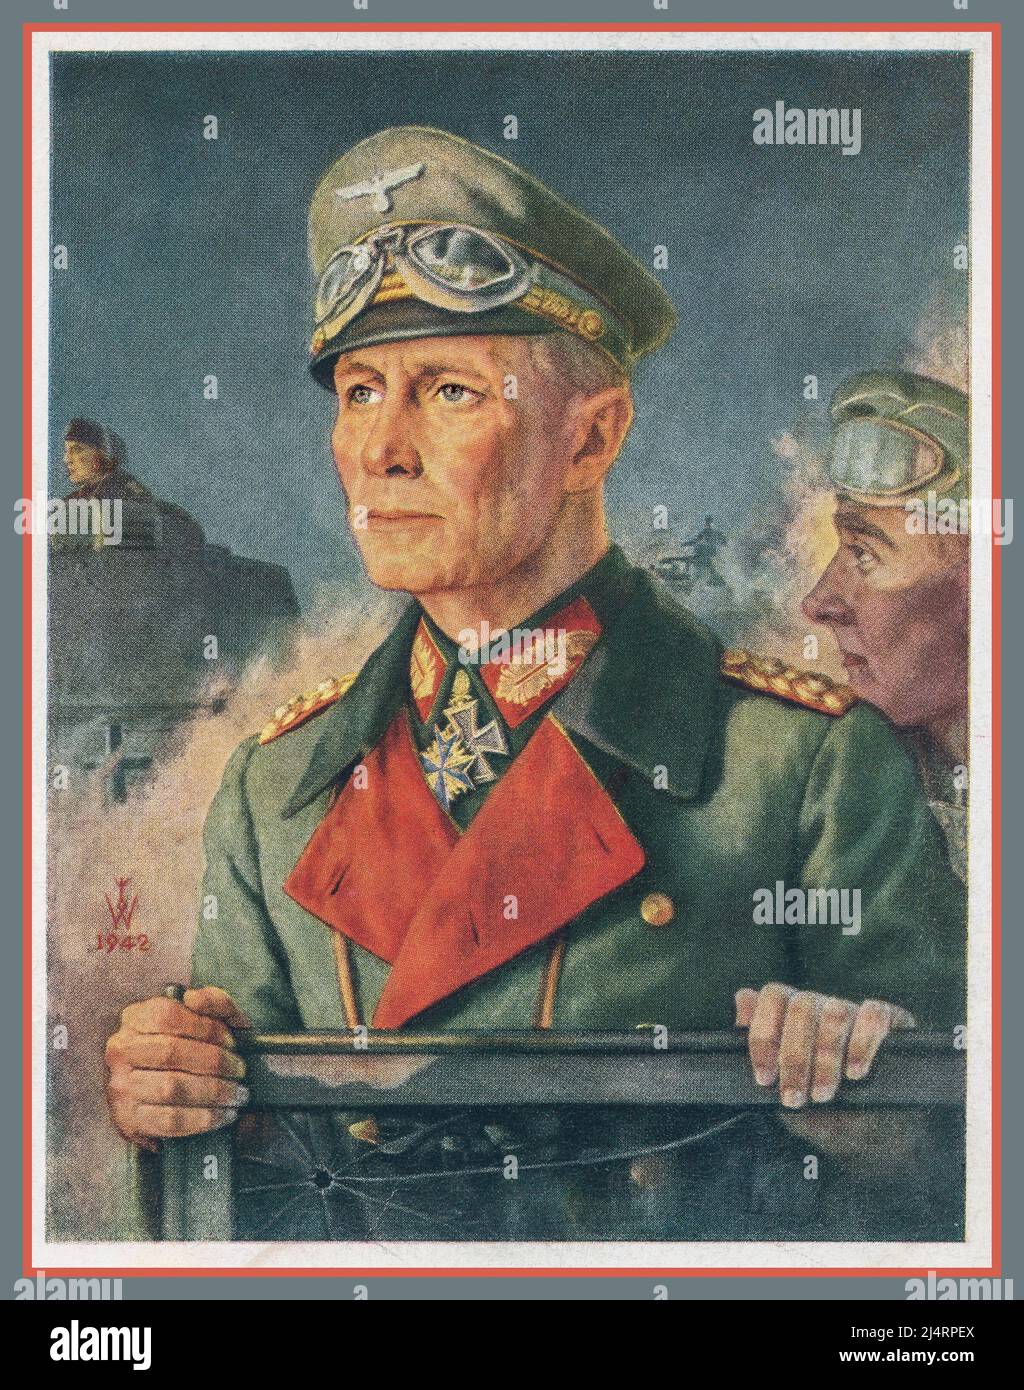 Vintage 1942 Field Marshall Erwin Rommel Poster card, a revered Nazi German hero and brilliant war strategist. 'The Desert Fox' of the North Africa campaign, wearing his Iron Cross medal with oak leaves swords and diamonds and the Pour le Merite Cross  WW2 World War II Second World War Painting Illustration Colour Stock Photo